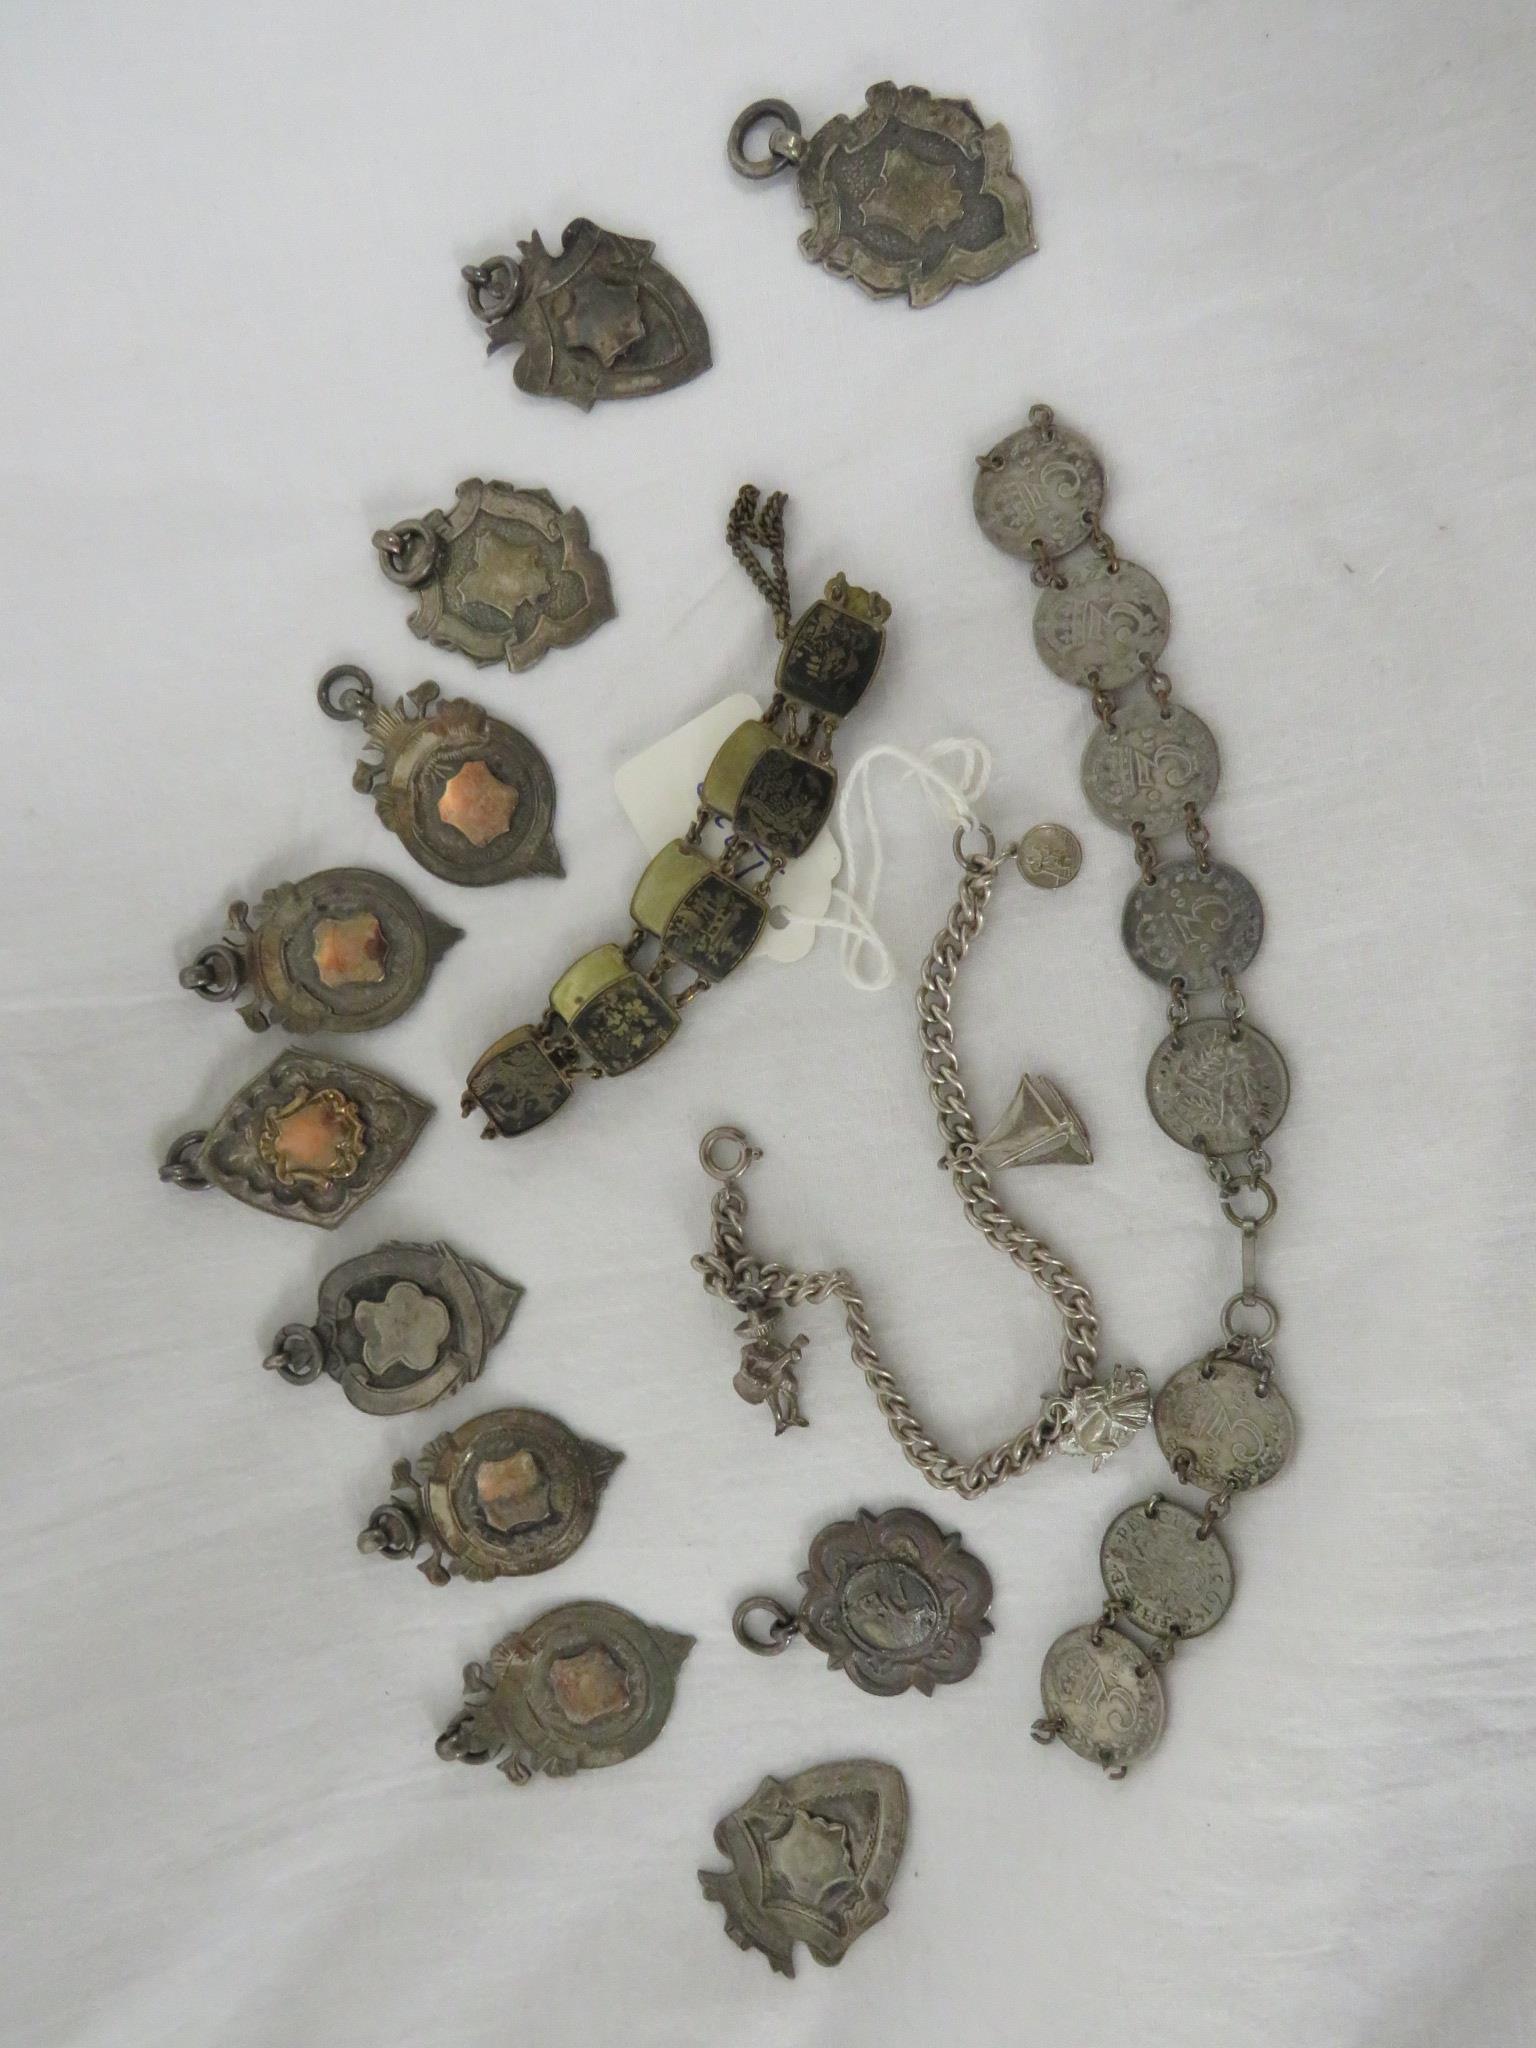 A SILVER FOOTBALL MEDALLION AND TEN OTHER SILVER MEDALLIONS, A CHARM BRACELET, SILVER THREEPENCE